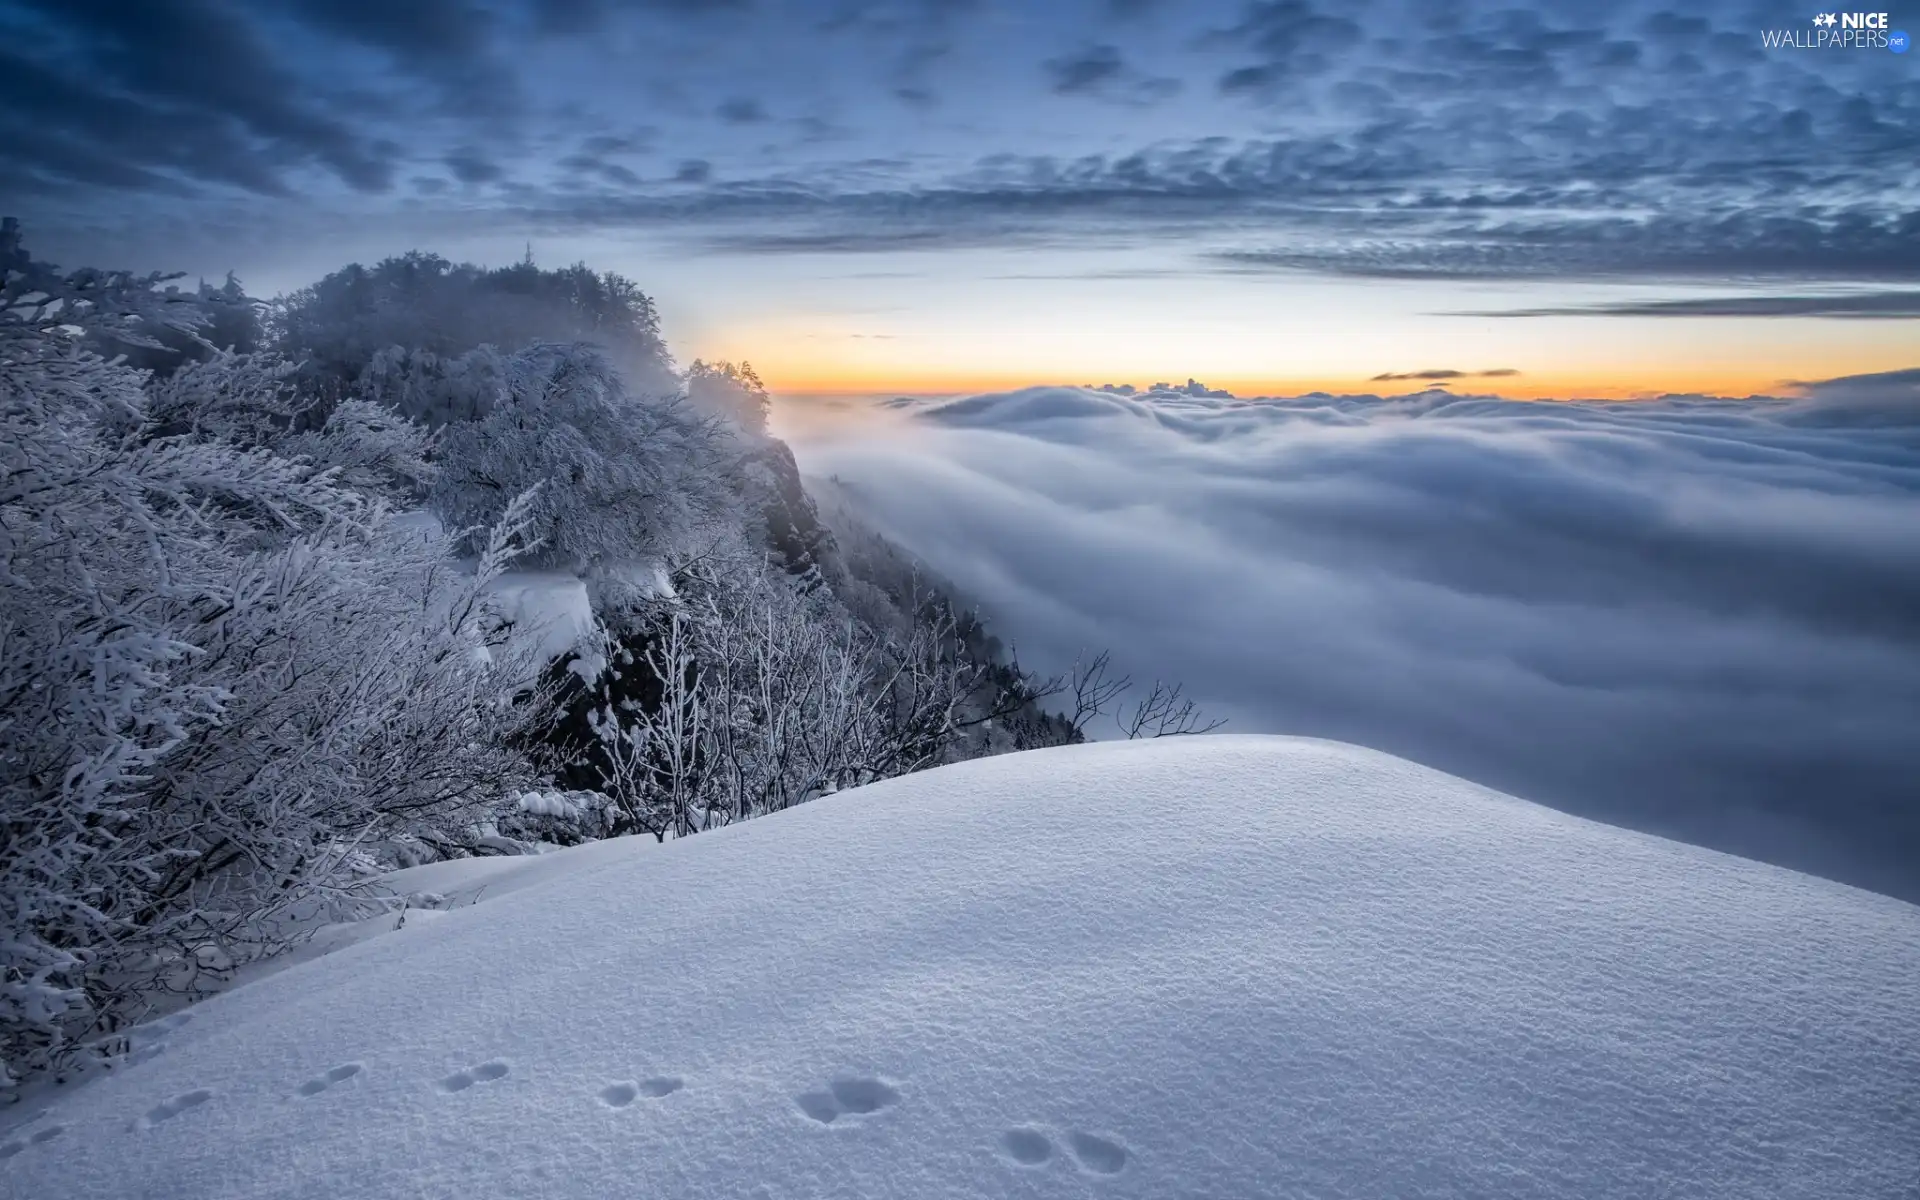 snow, winter, Mountains, Snowy, Great Sunsets, clouds, viewes, Fog, trees